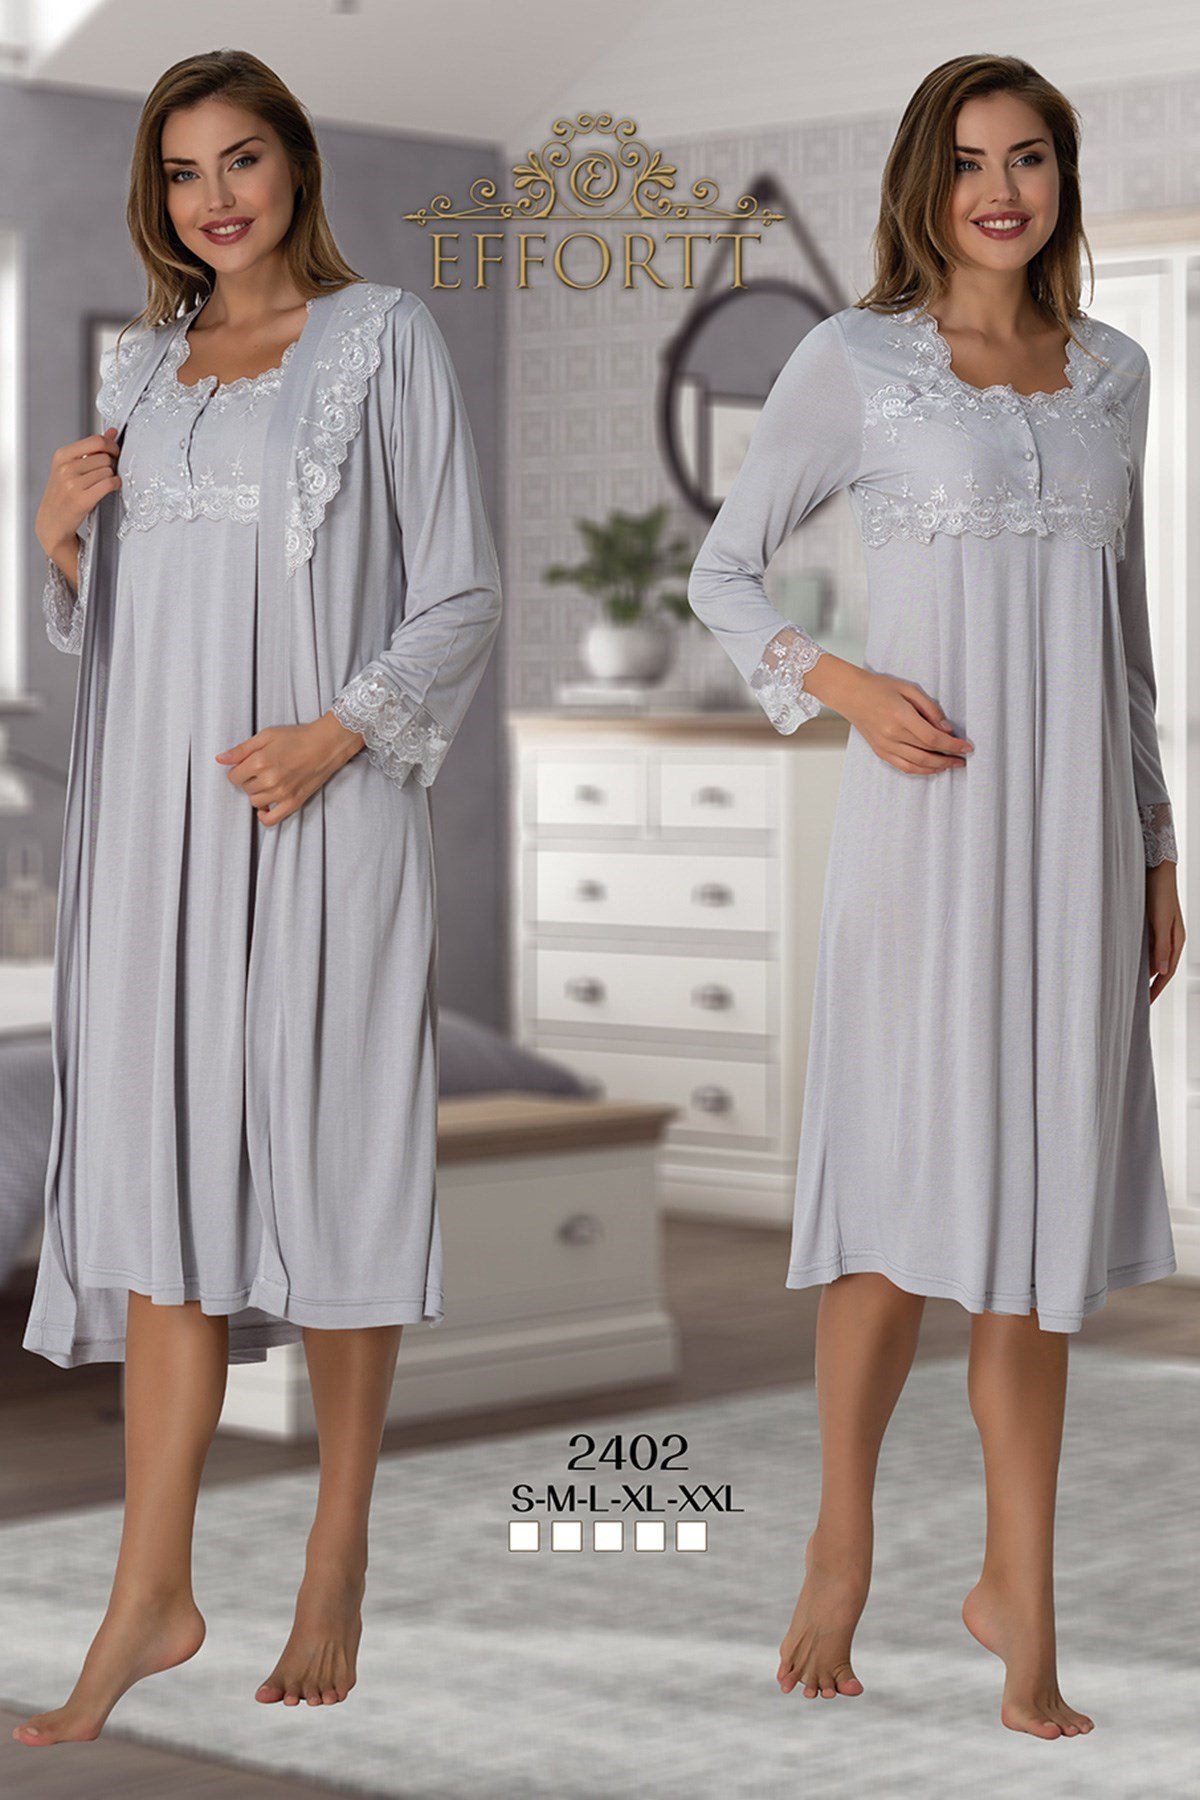 Effortt 2402 Maternity Nightgown and Robe Sets